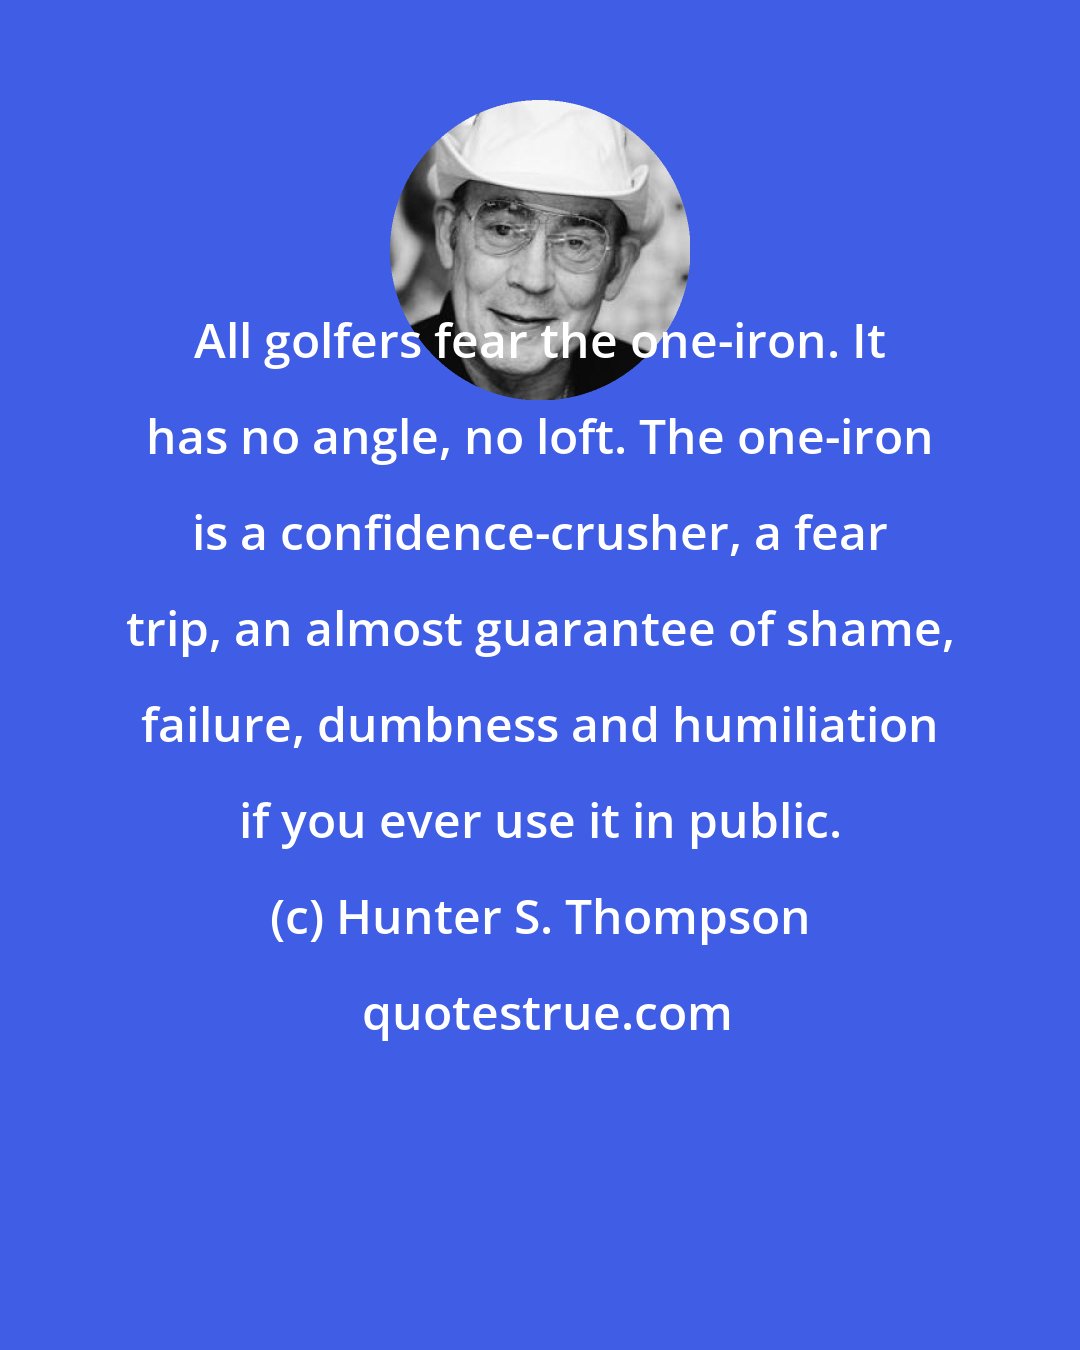 Hunter S. Thompson: All golfers fear the one-iron. It has no angle, no loft. The one-iron is a confidence-crusher, a fear trip, an almost guarantee of shame, failure, dumbness and humiliation if you ever use it in public.